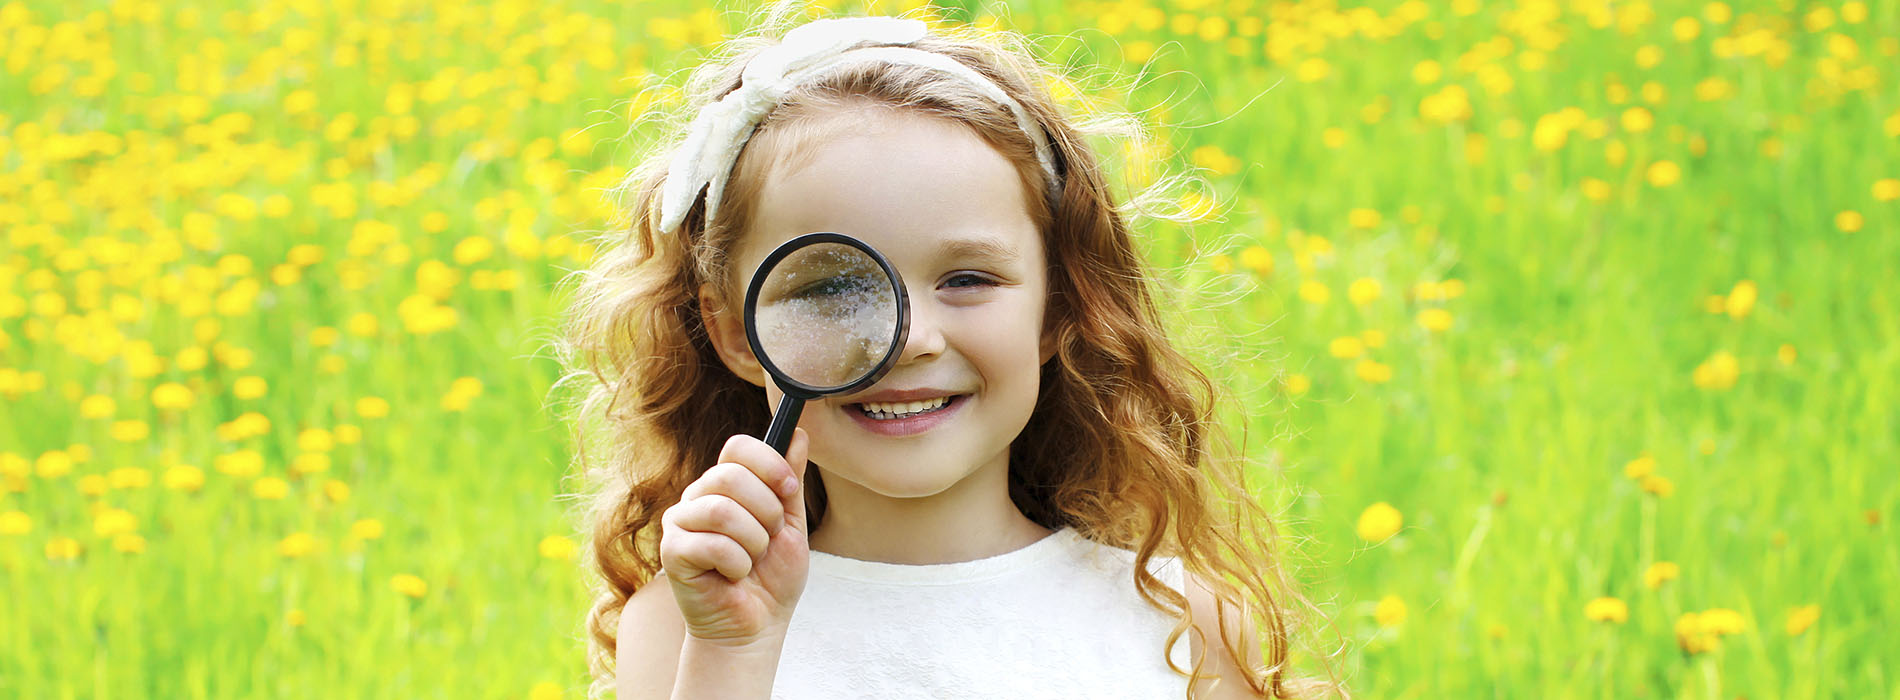 Smiling girl standing in a green field, looking through a magnifying glass